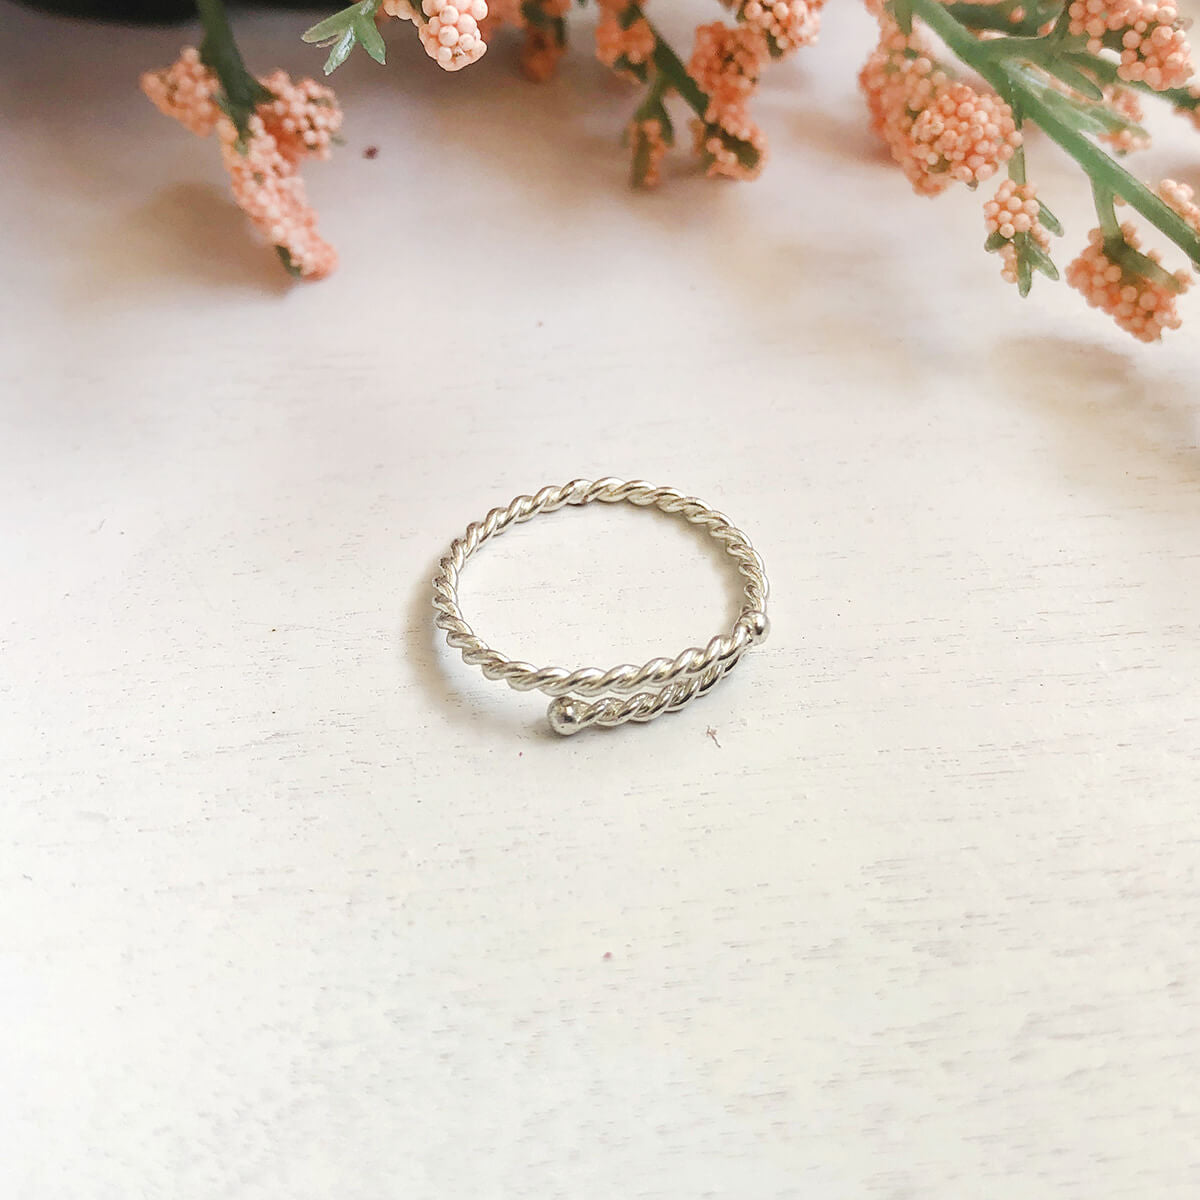 Image of the silver Twisted Stacking Ring, next to flowers.